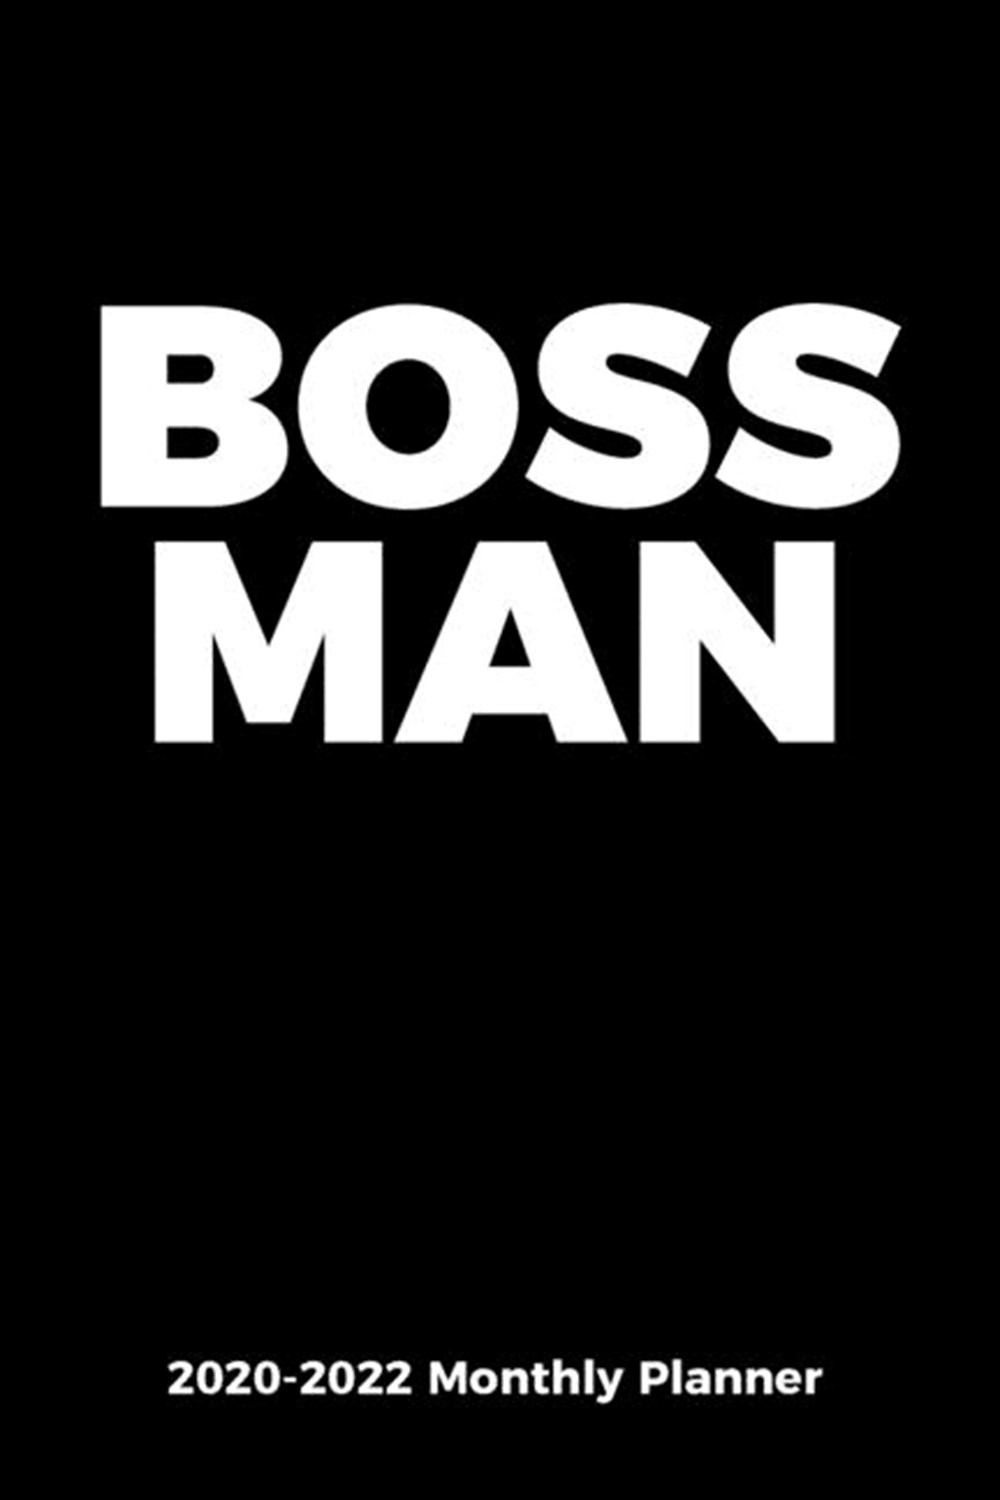 2020-2022 Monthly Planner for Professionals, Executives, and Entrepreneurs - BOSS MAN 36 Month Agend